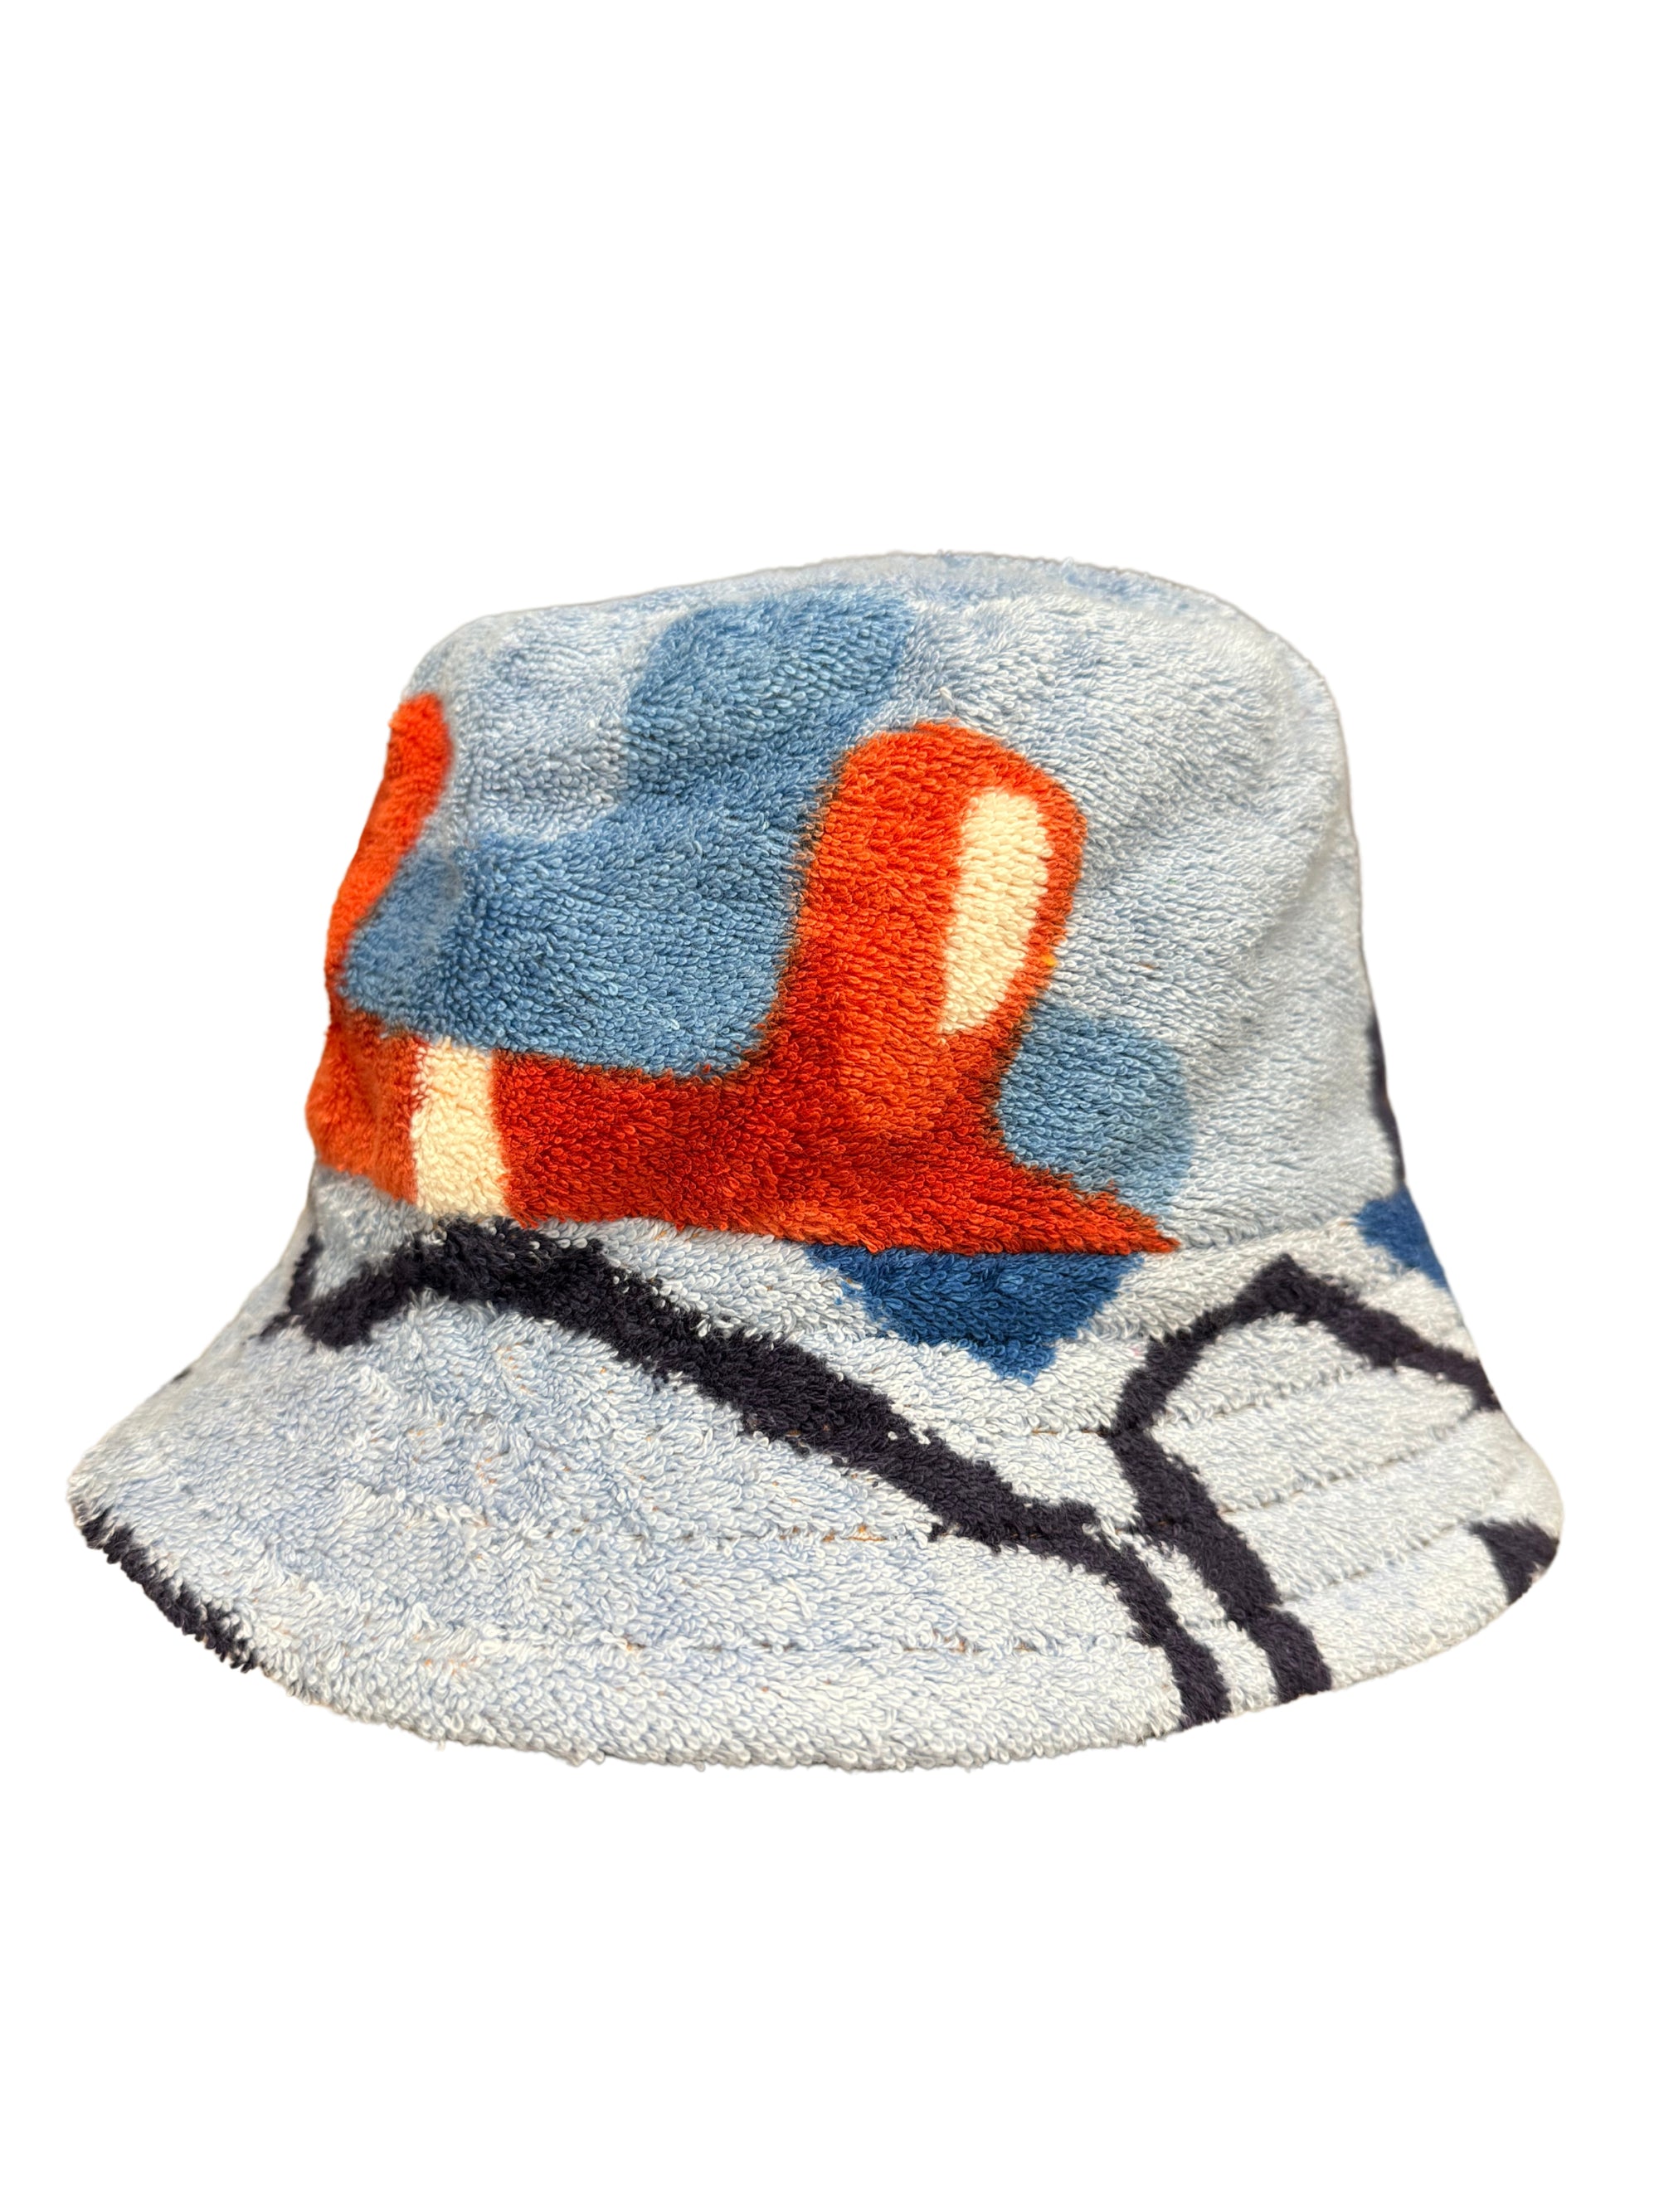 The Up-Cycled Bucket Hat